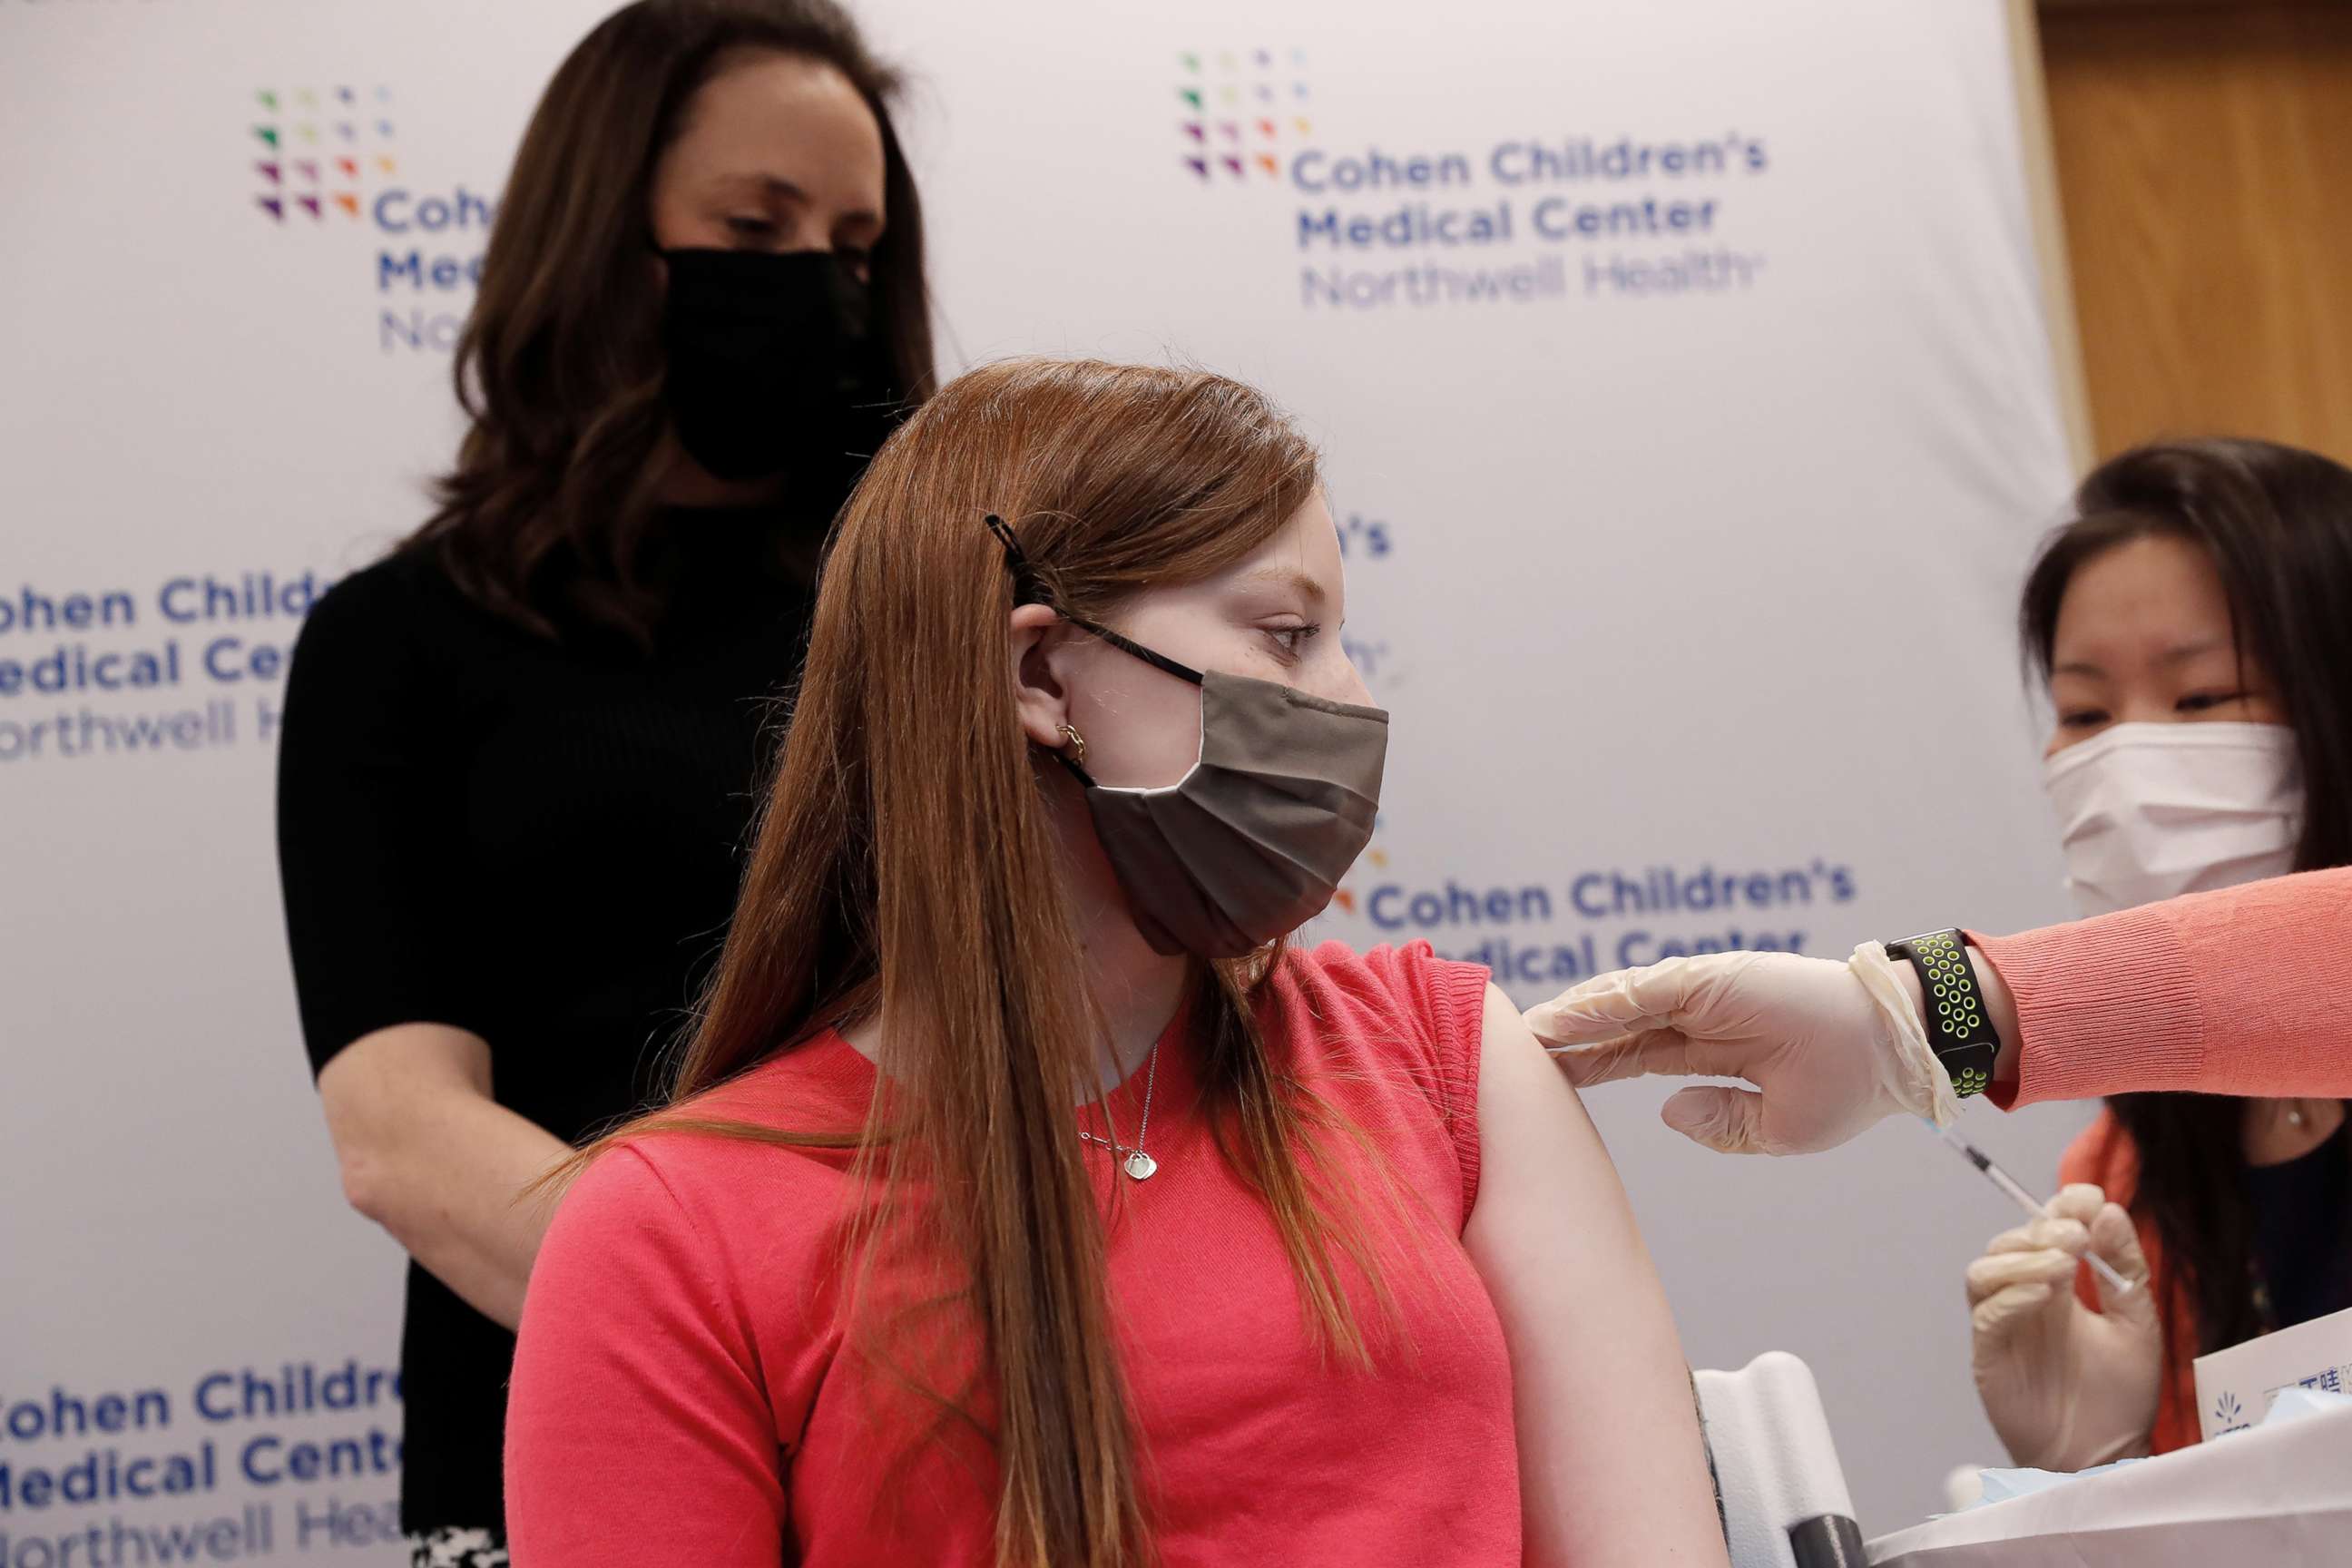 PHOTO: Hanna Riva Goldberg, 16, receives the first dose of the Pfizer COVID-19 vaccine from Dr. Sophia Chan at a Northwell Health vaccination pod in New Hyde Park, N.Y., April 6, 2021.